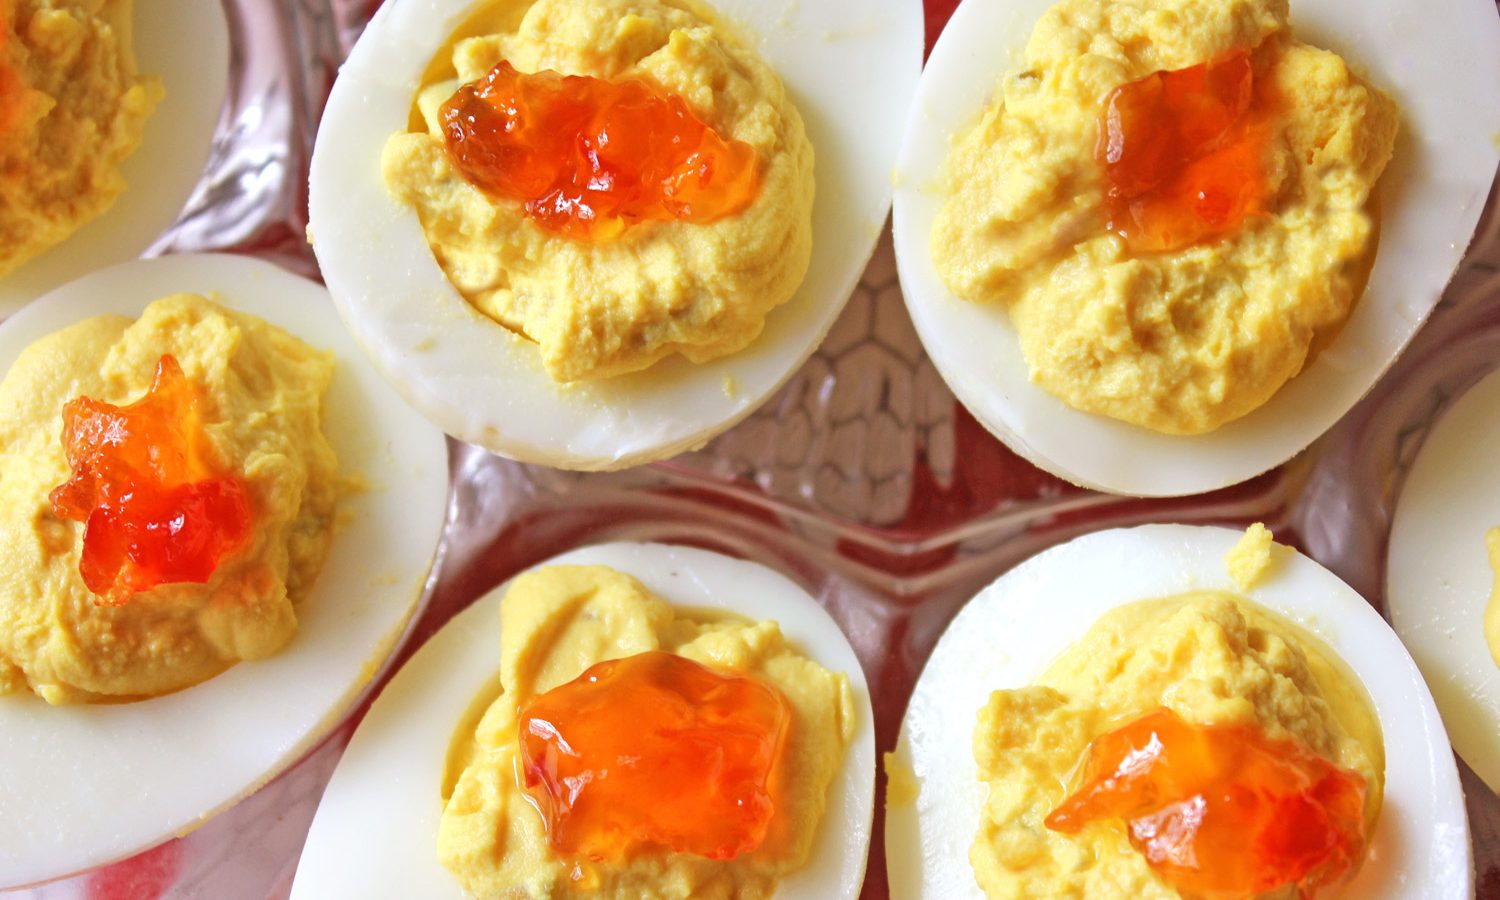 Plated deviled eggs with red pepper jelly garnish